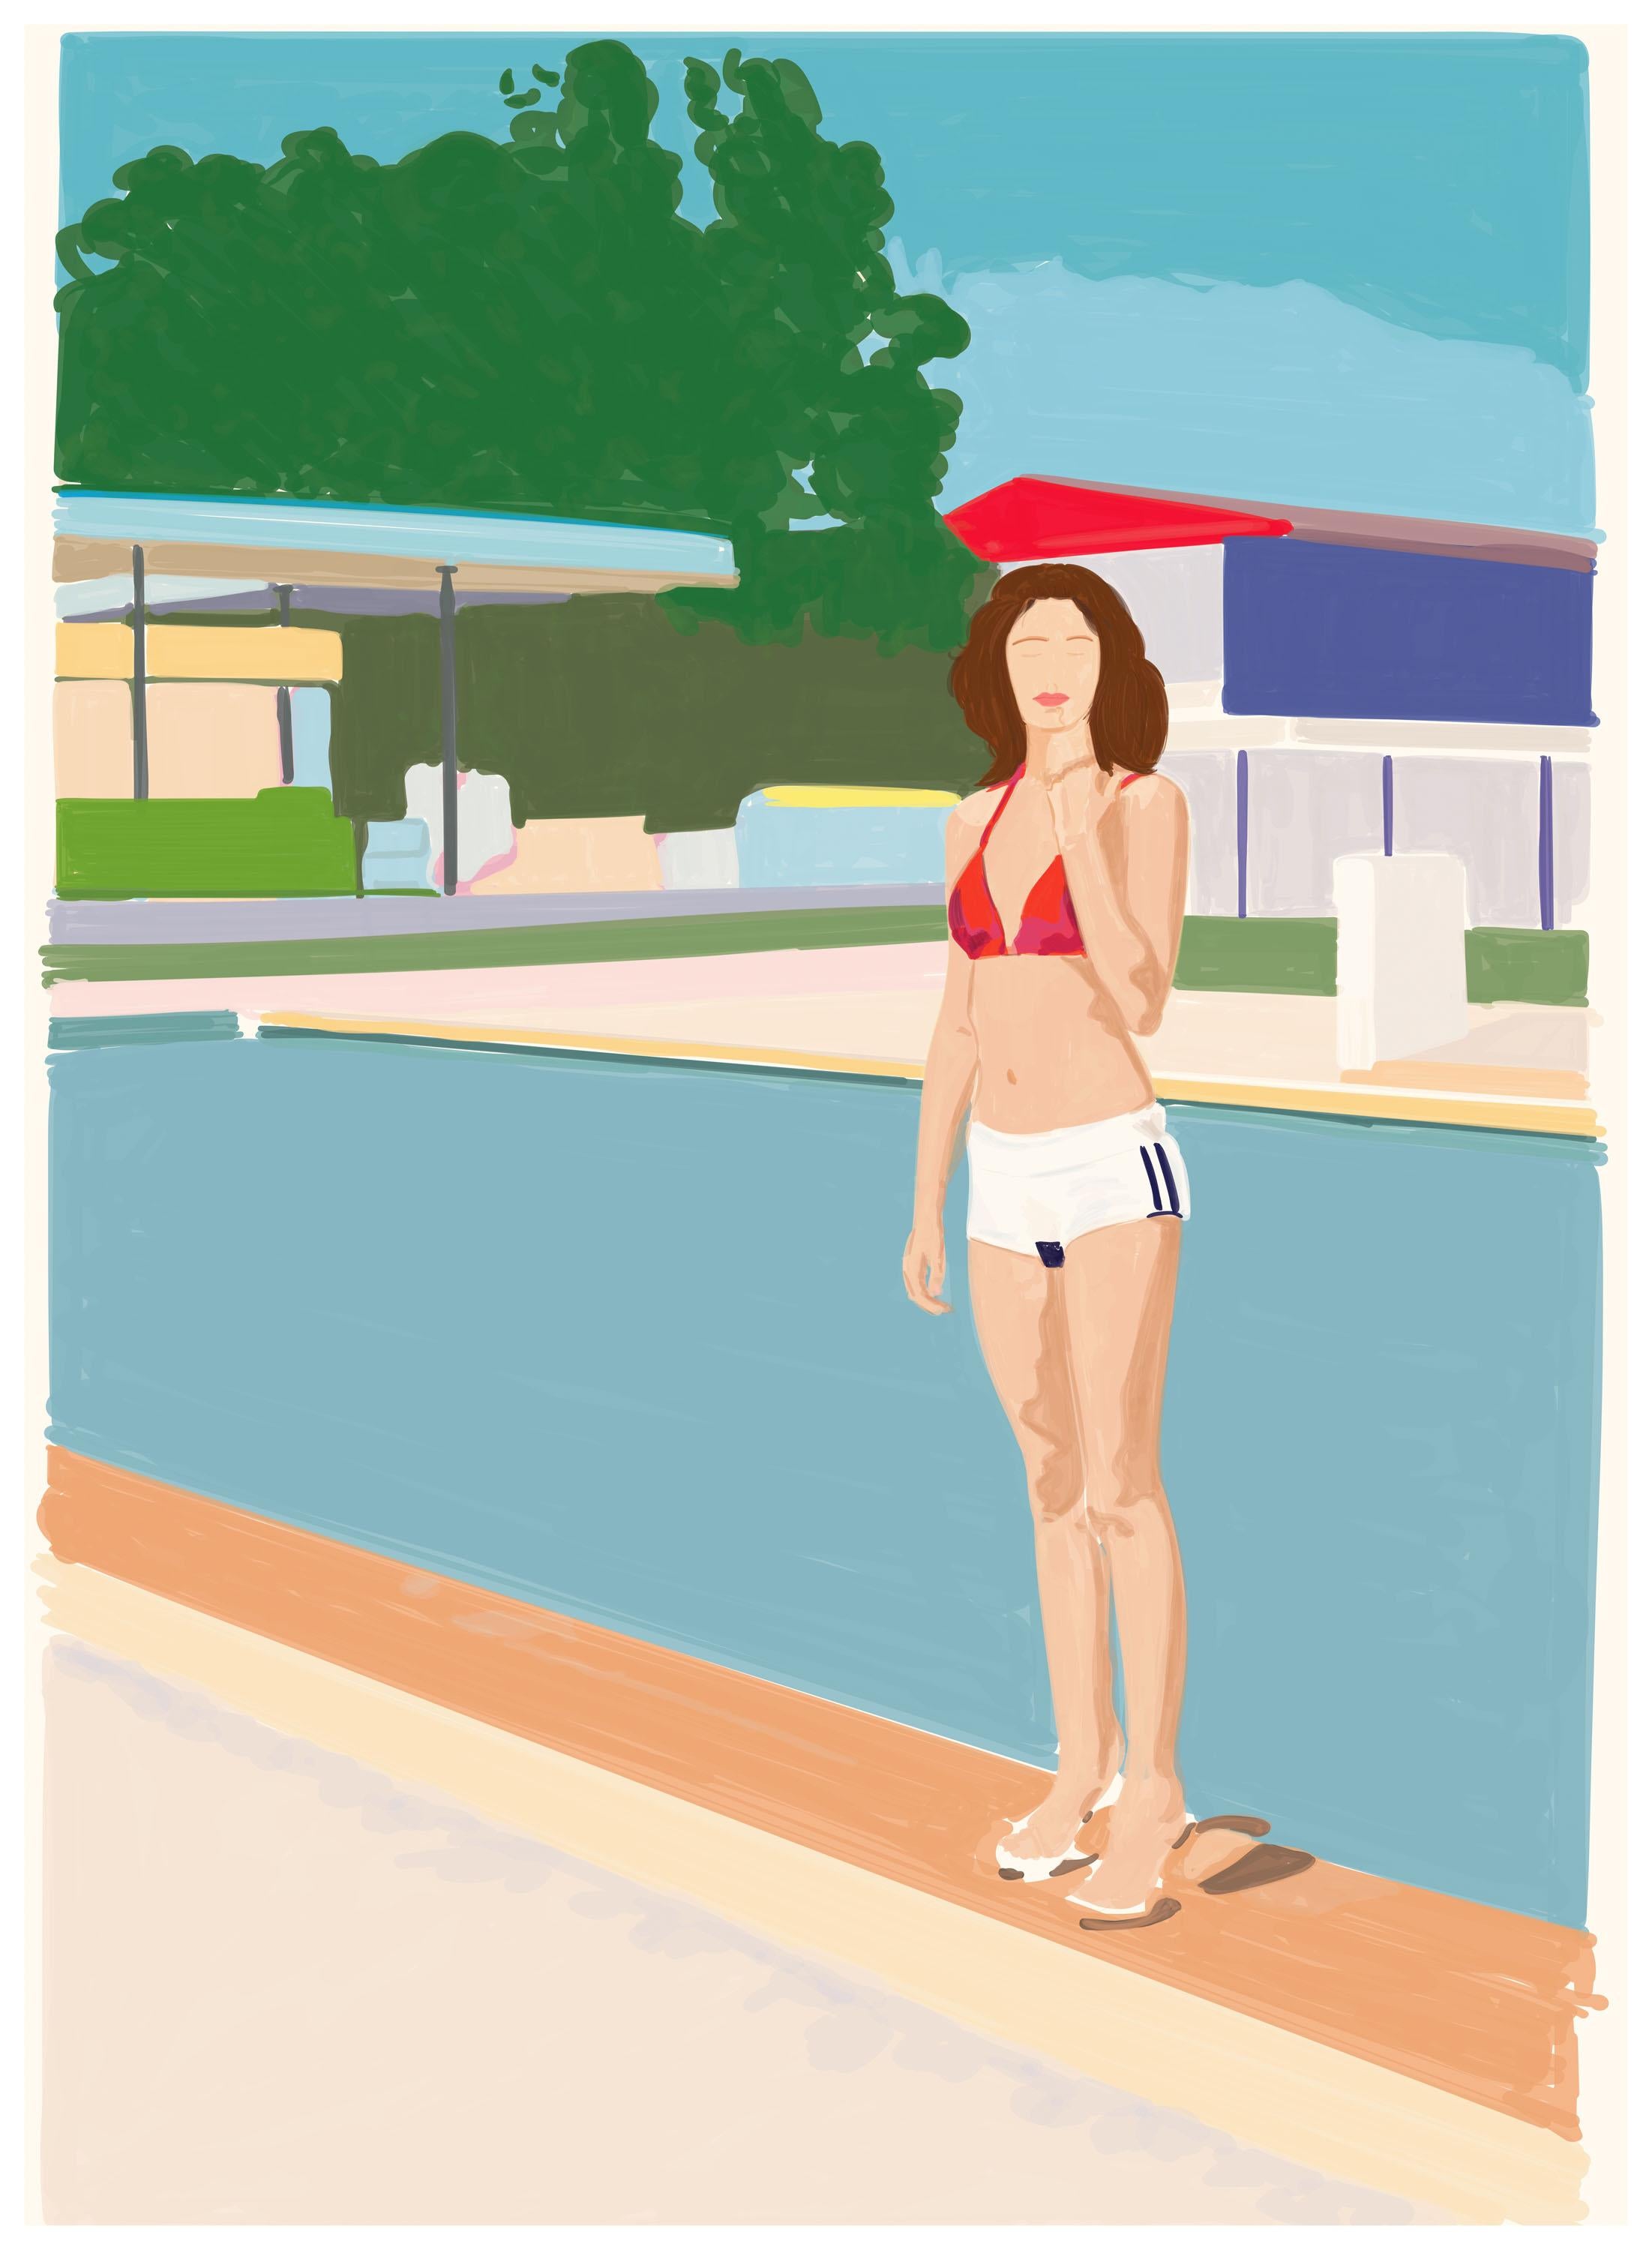 Italian Contemporary Art By Mario Sughi - Lucy At The Swimming Pool